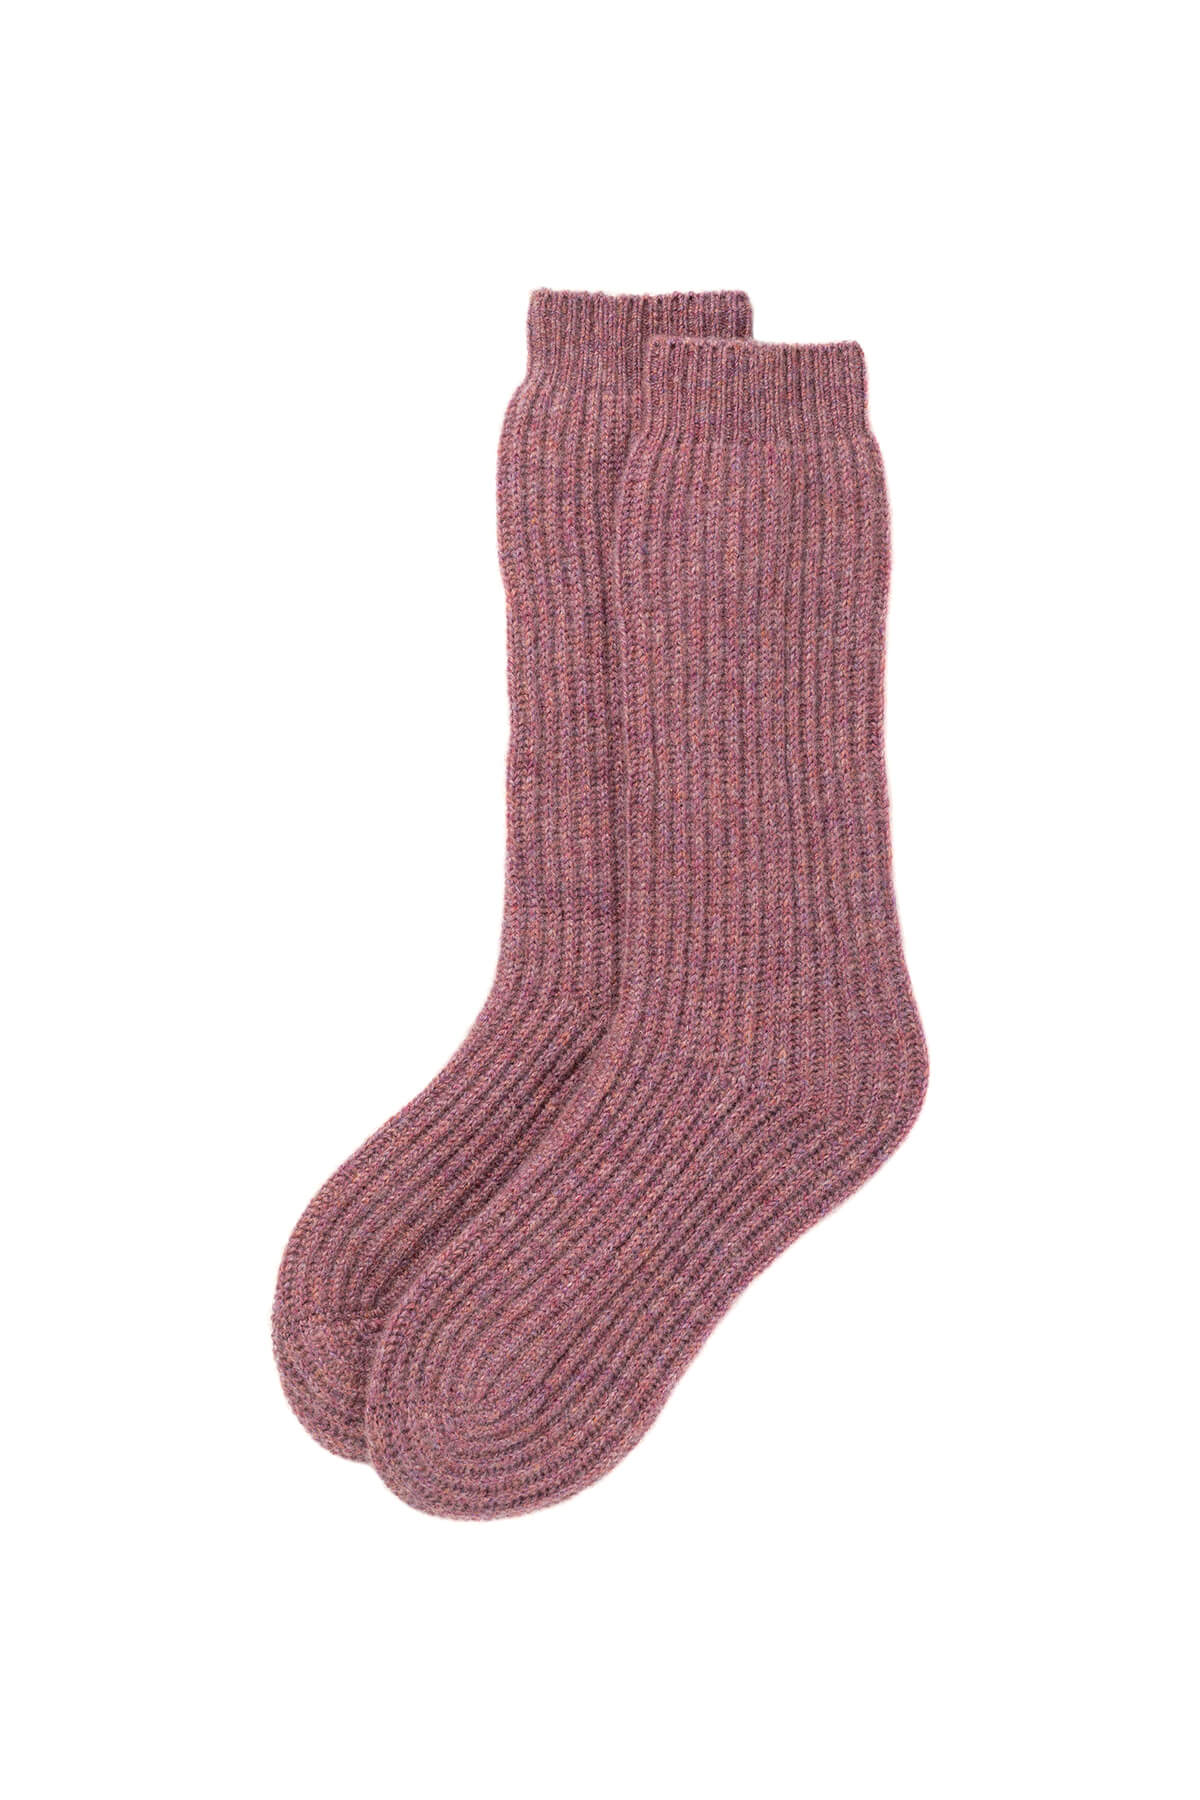 Johnstons of Elgin’s Heather pink Luxe Ribbed Cashmere Bed Socks on a white background HAE02240HE4307ONE